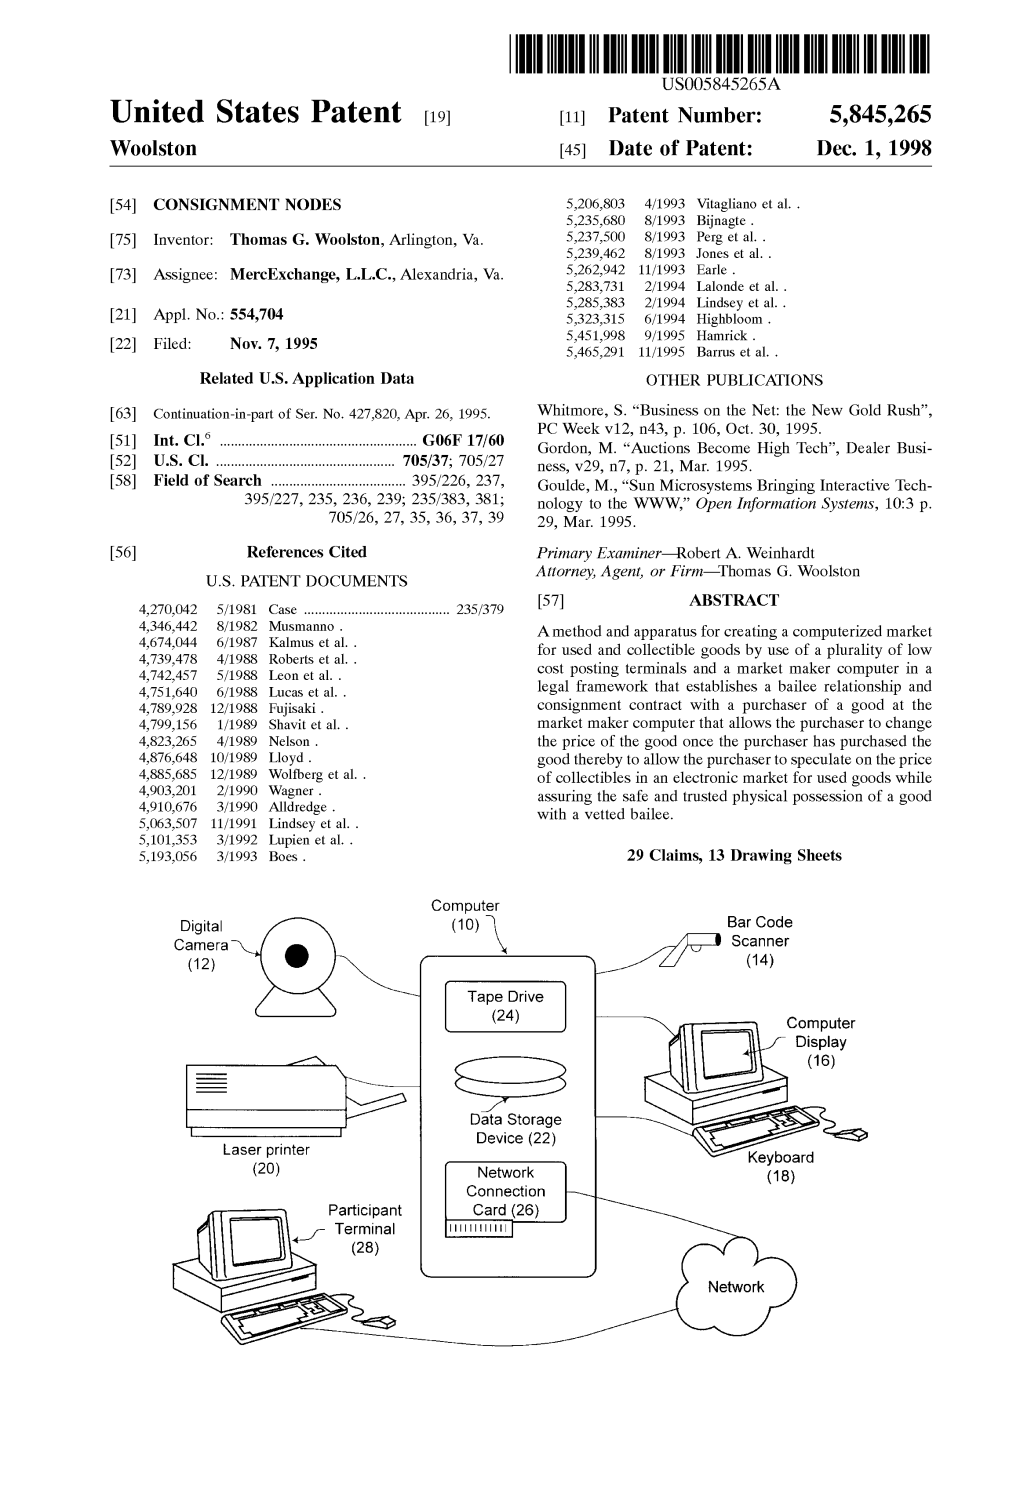 United States Patent (19) 11 Patent Number: 5,845,265 Woolston (45) Date of Patent: Dec